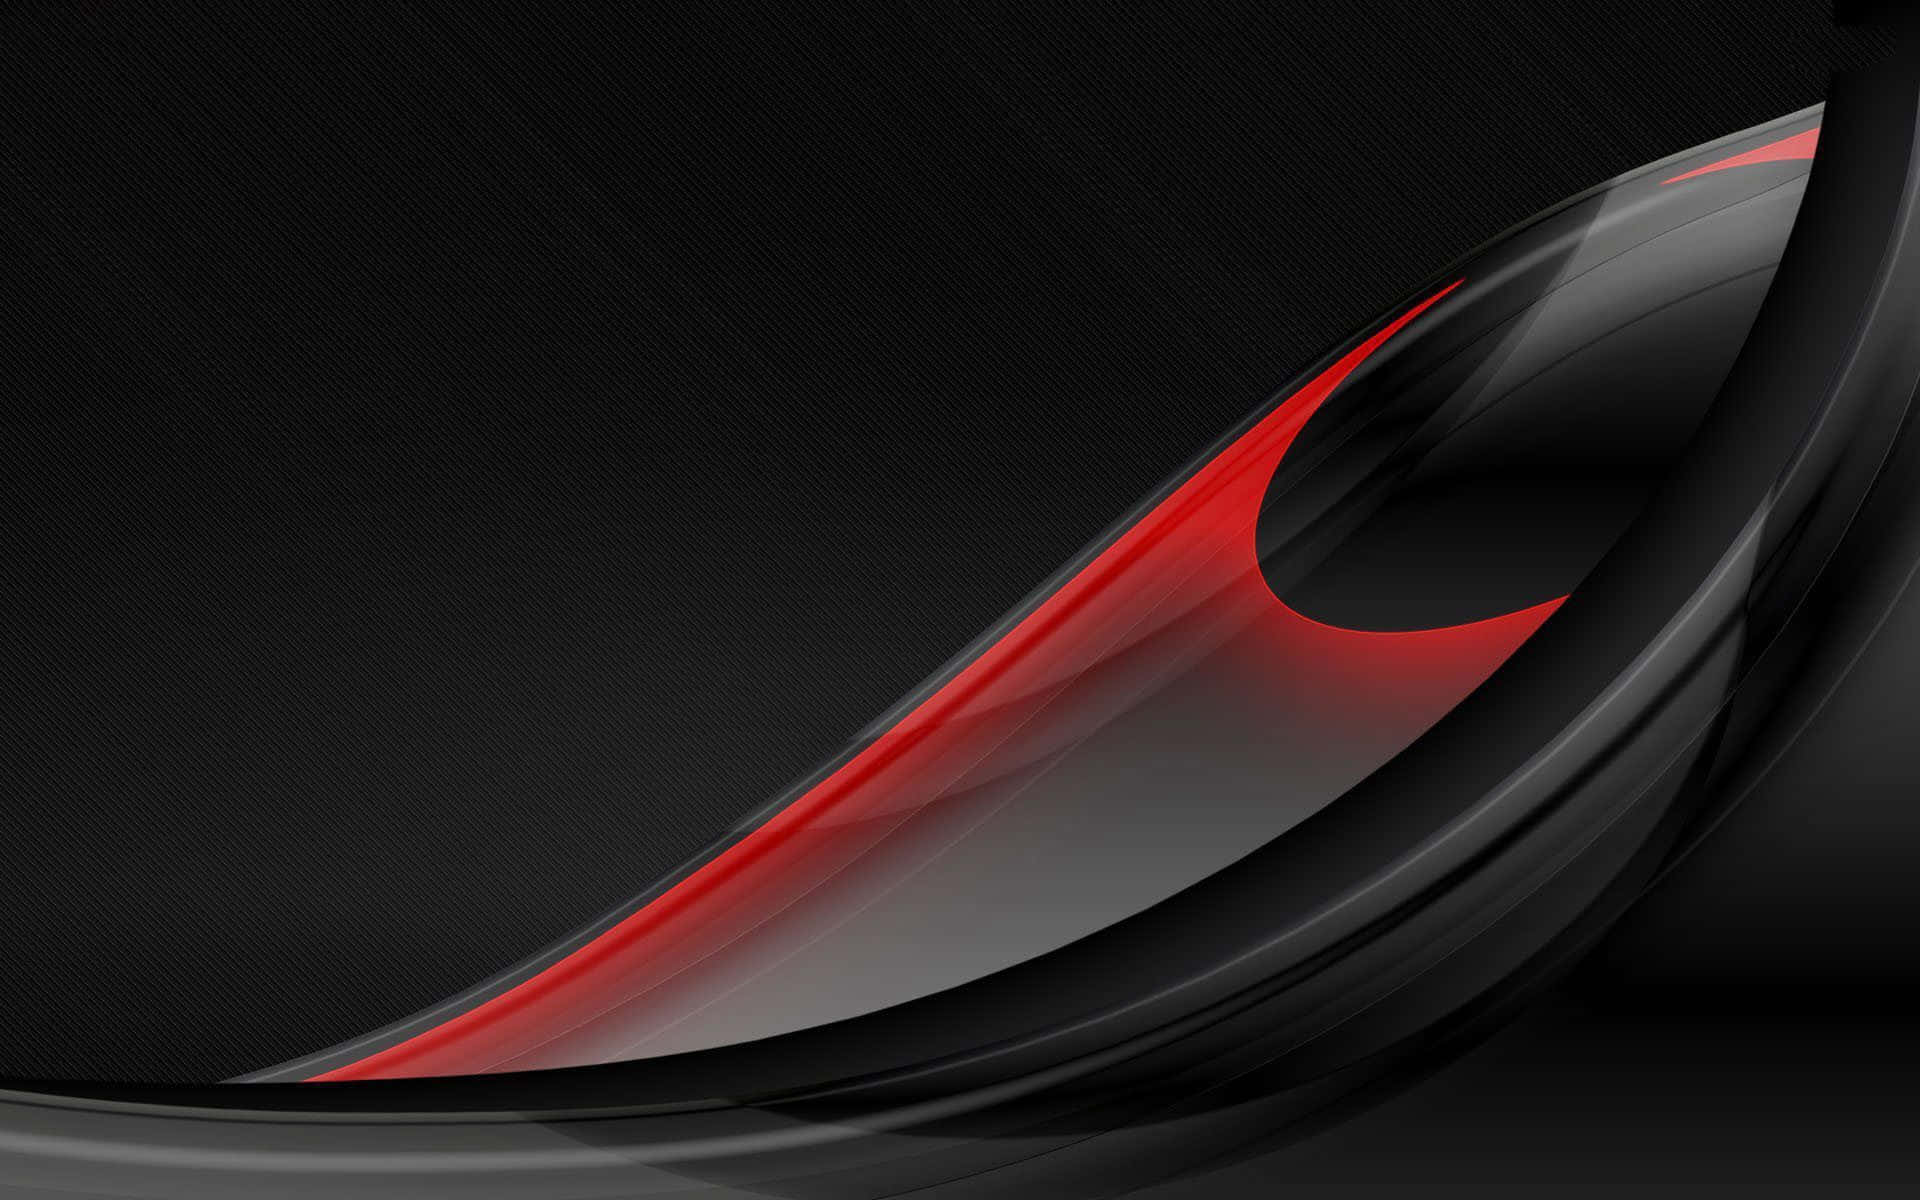 Get creative with this bold and fashionable red and black background